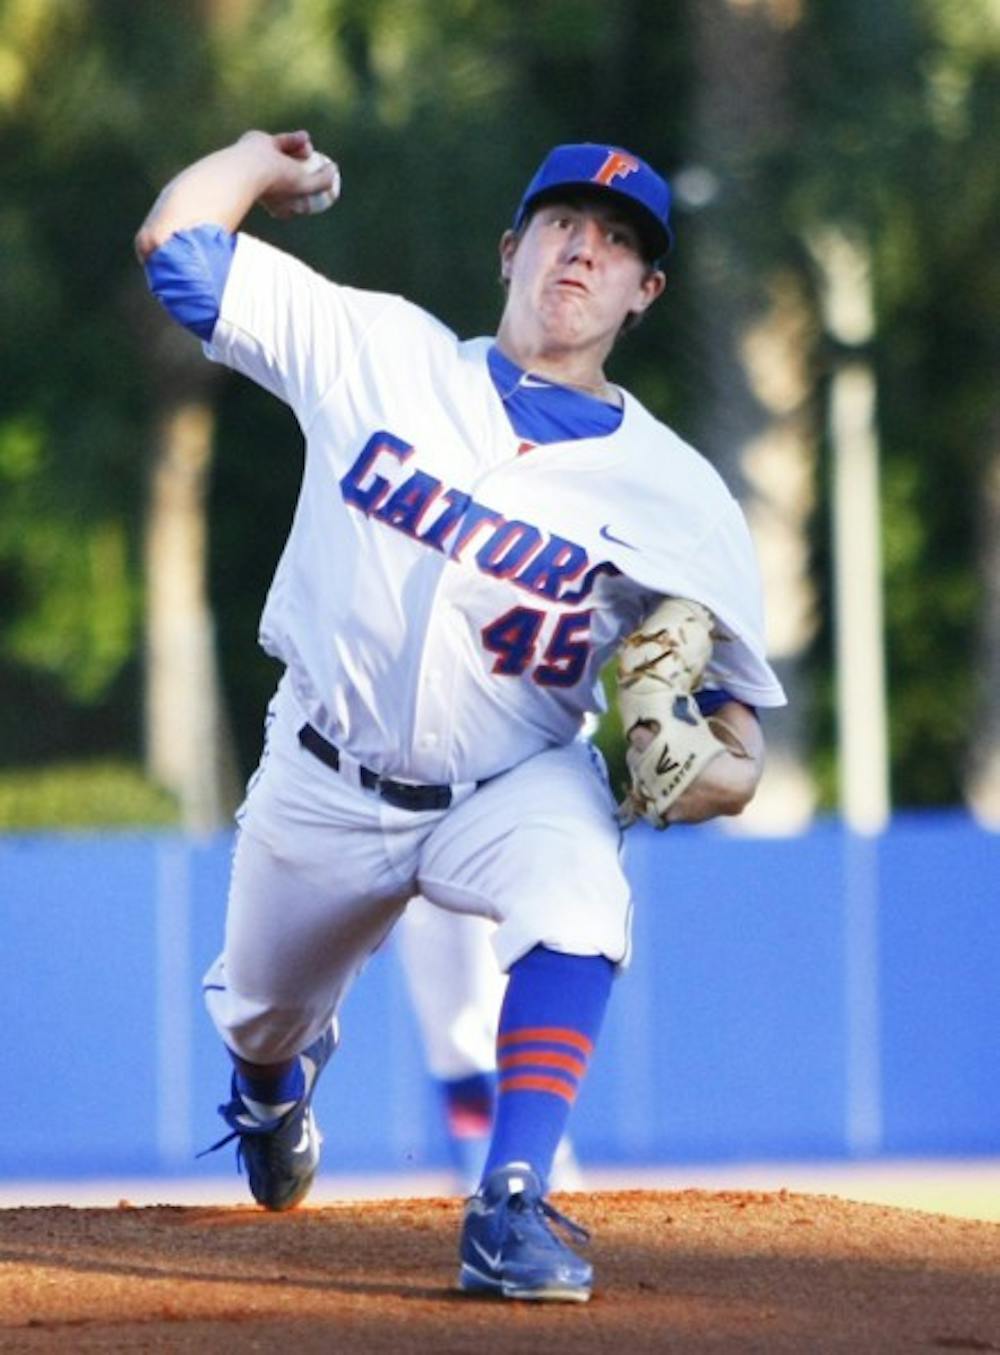 <p>Johnny Magliozzi pitches against USF on April 24, 2012. Magliozzi announced Monday that he would sign with the New York Mets and leave UF after two seasons.&nbsp;</p>